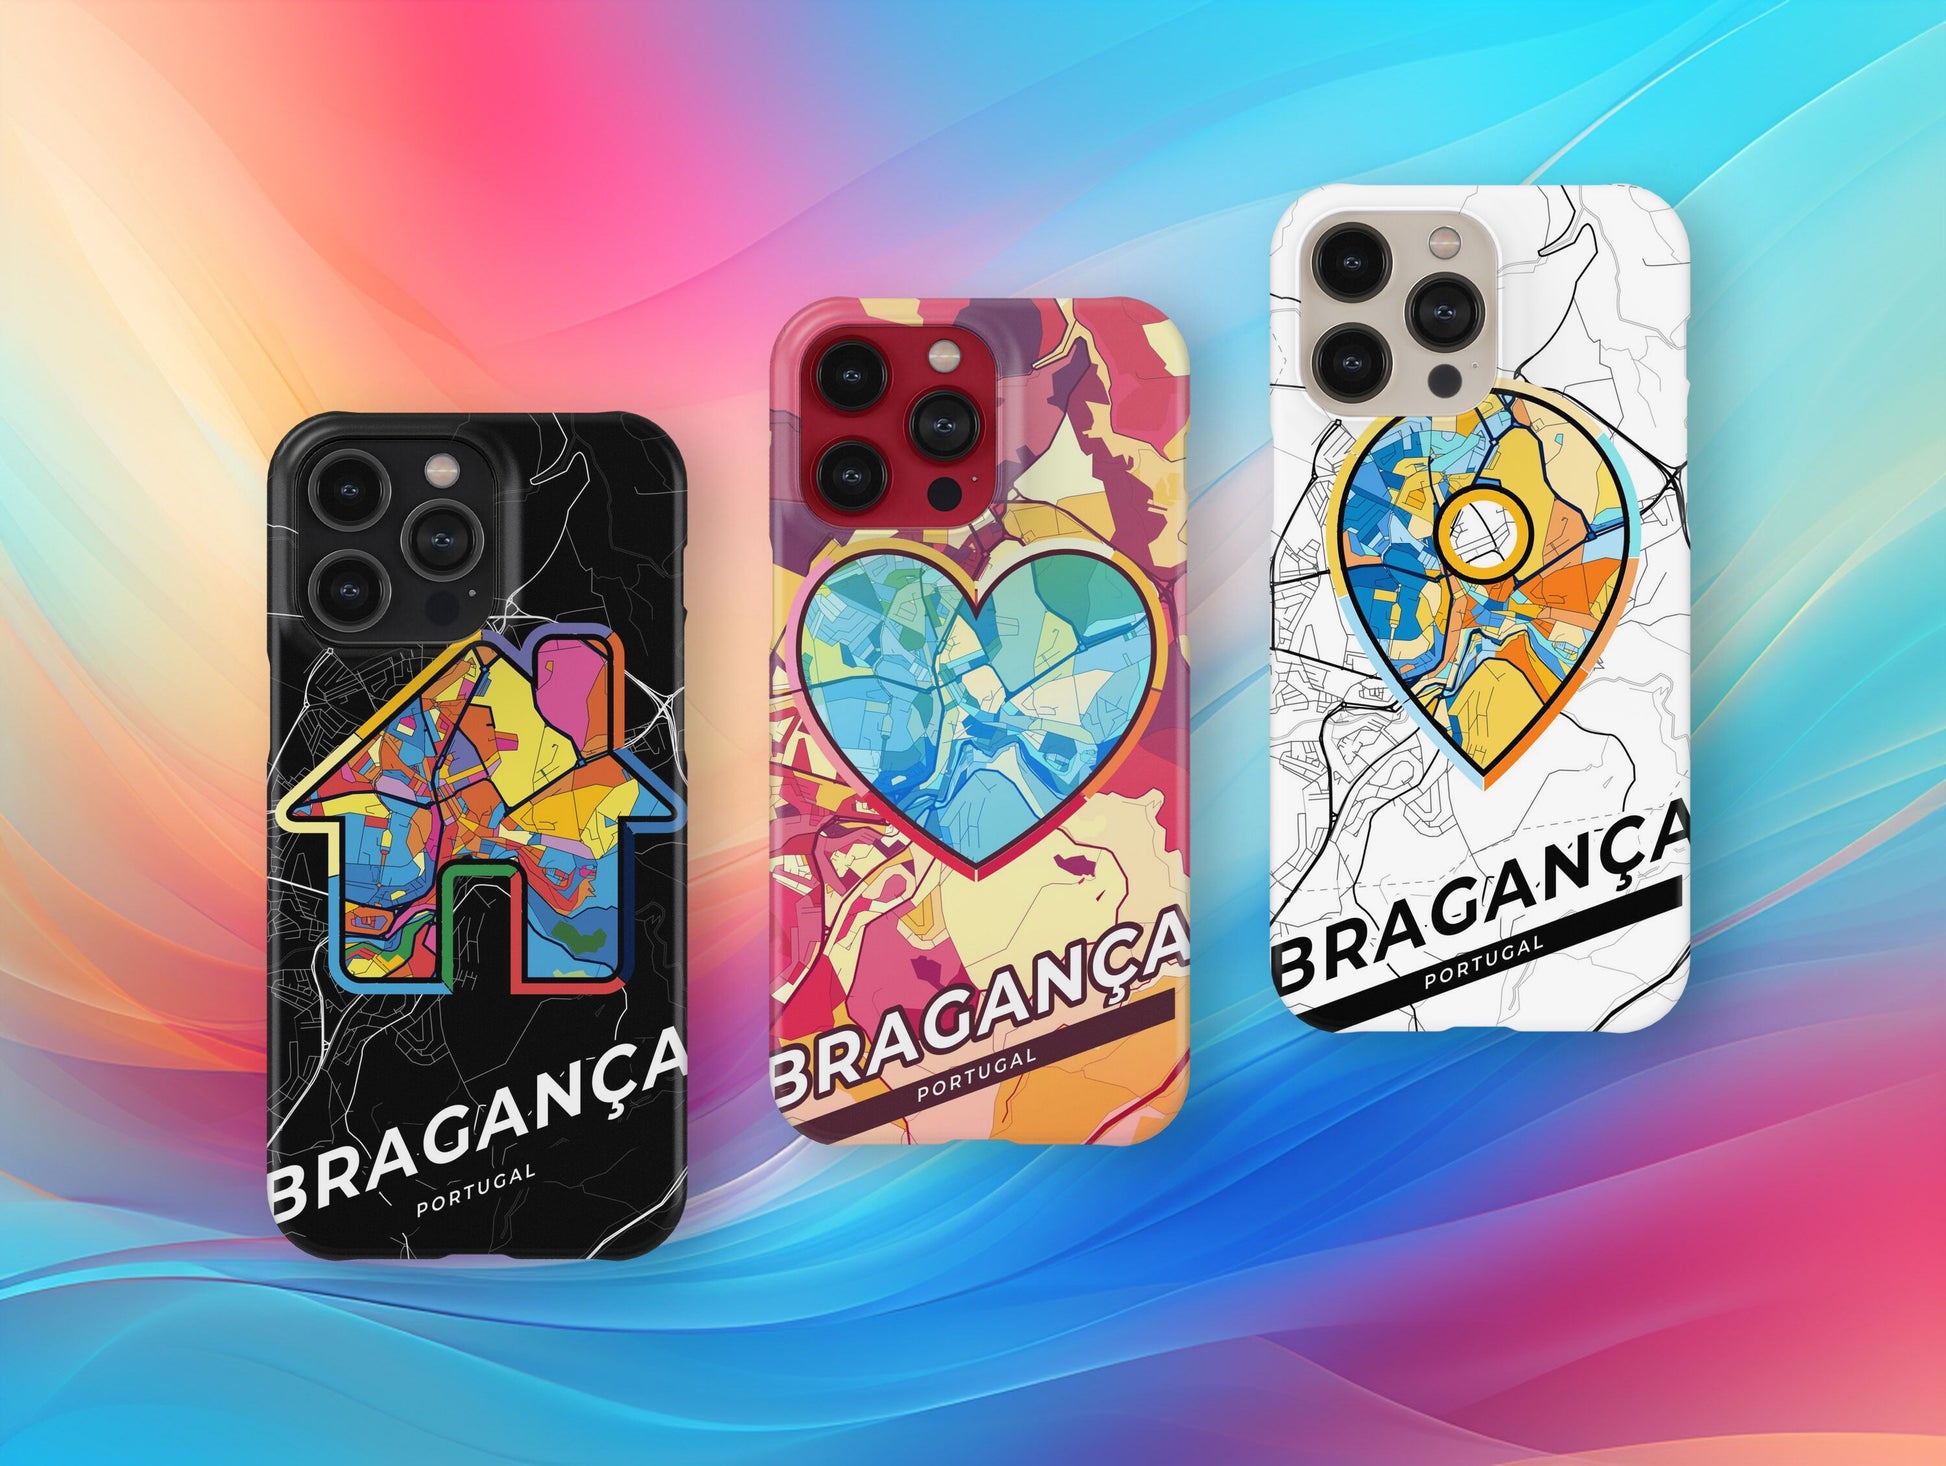 Bragança Portugal slim phone case with colorful icon. Birthday, wedding or housewarming gift. Couple match cases.